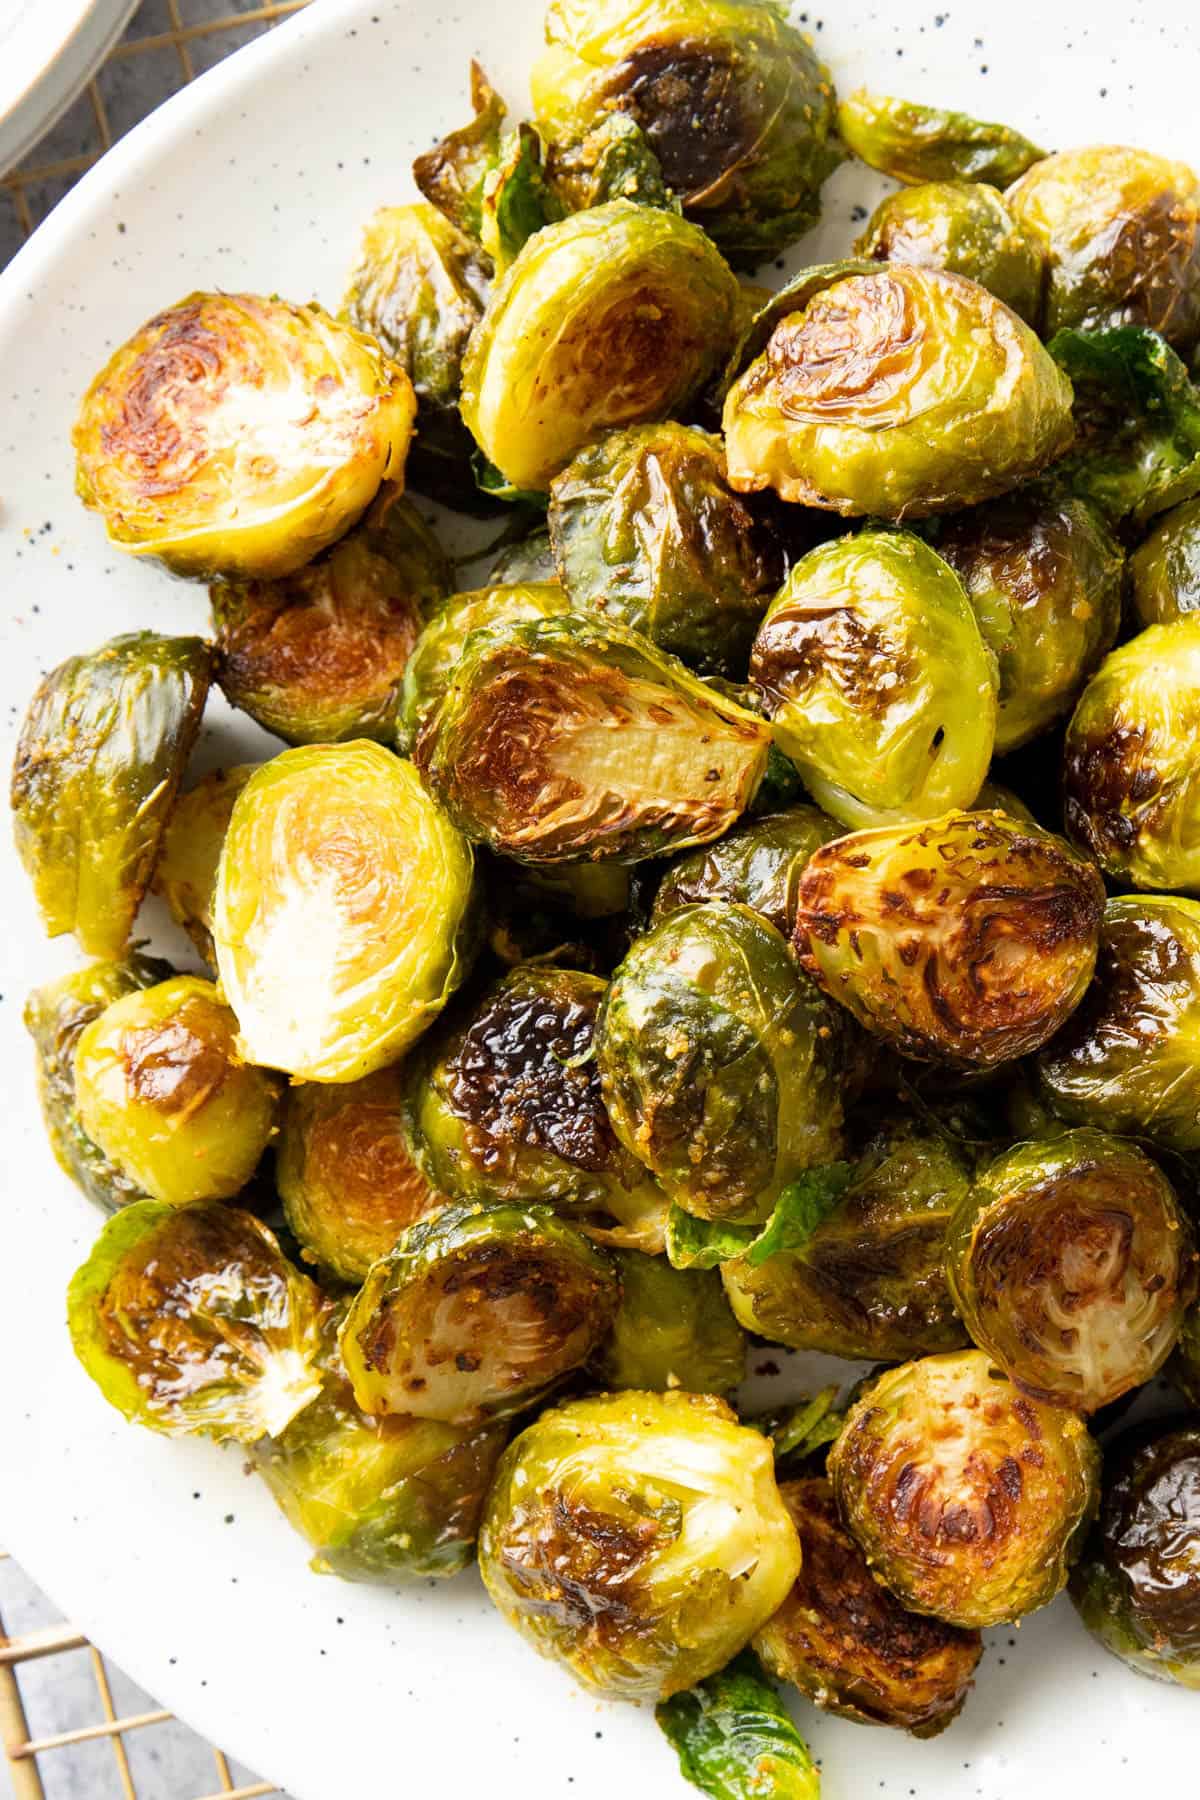 Closeup photo of this vegan brussels sprouts recipe on a plate